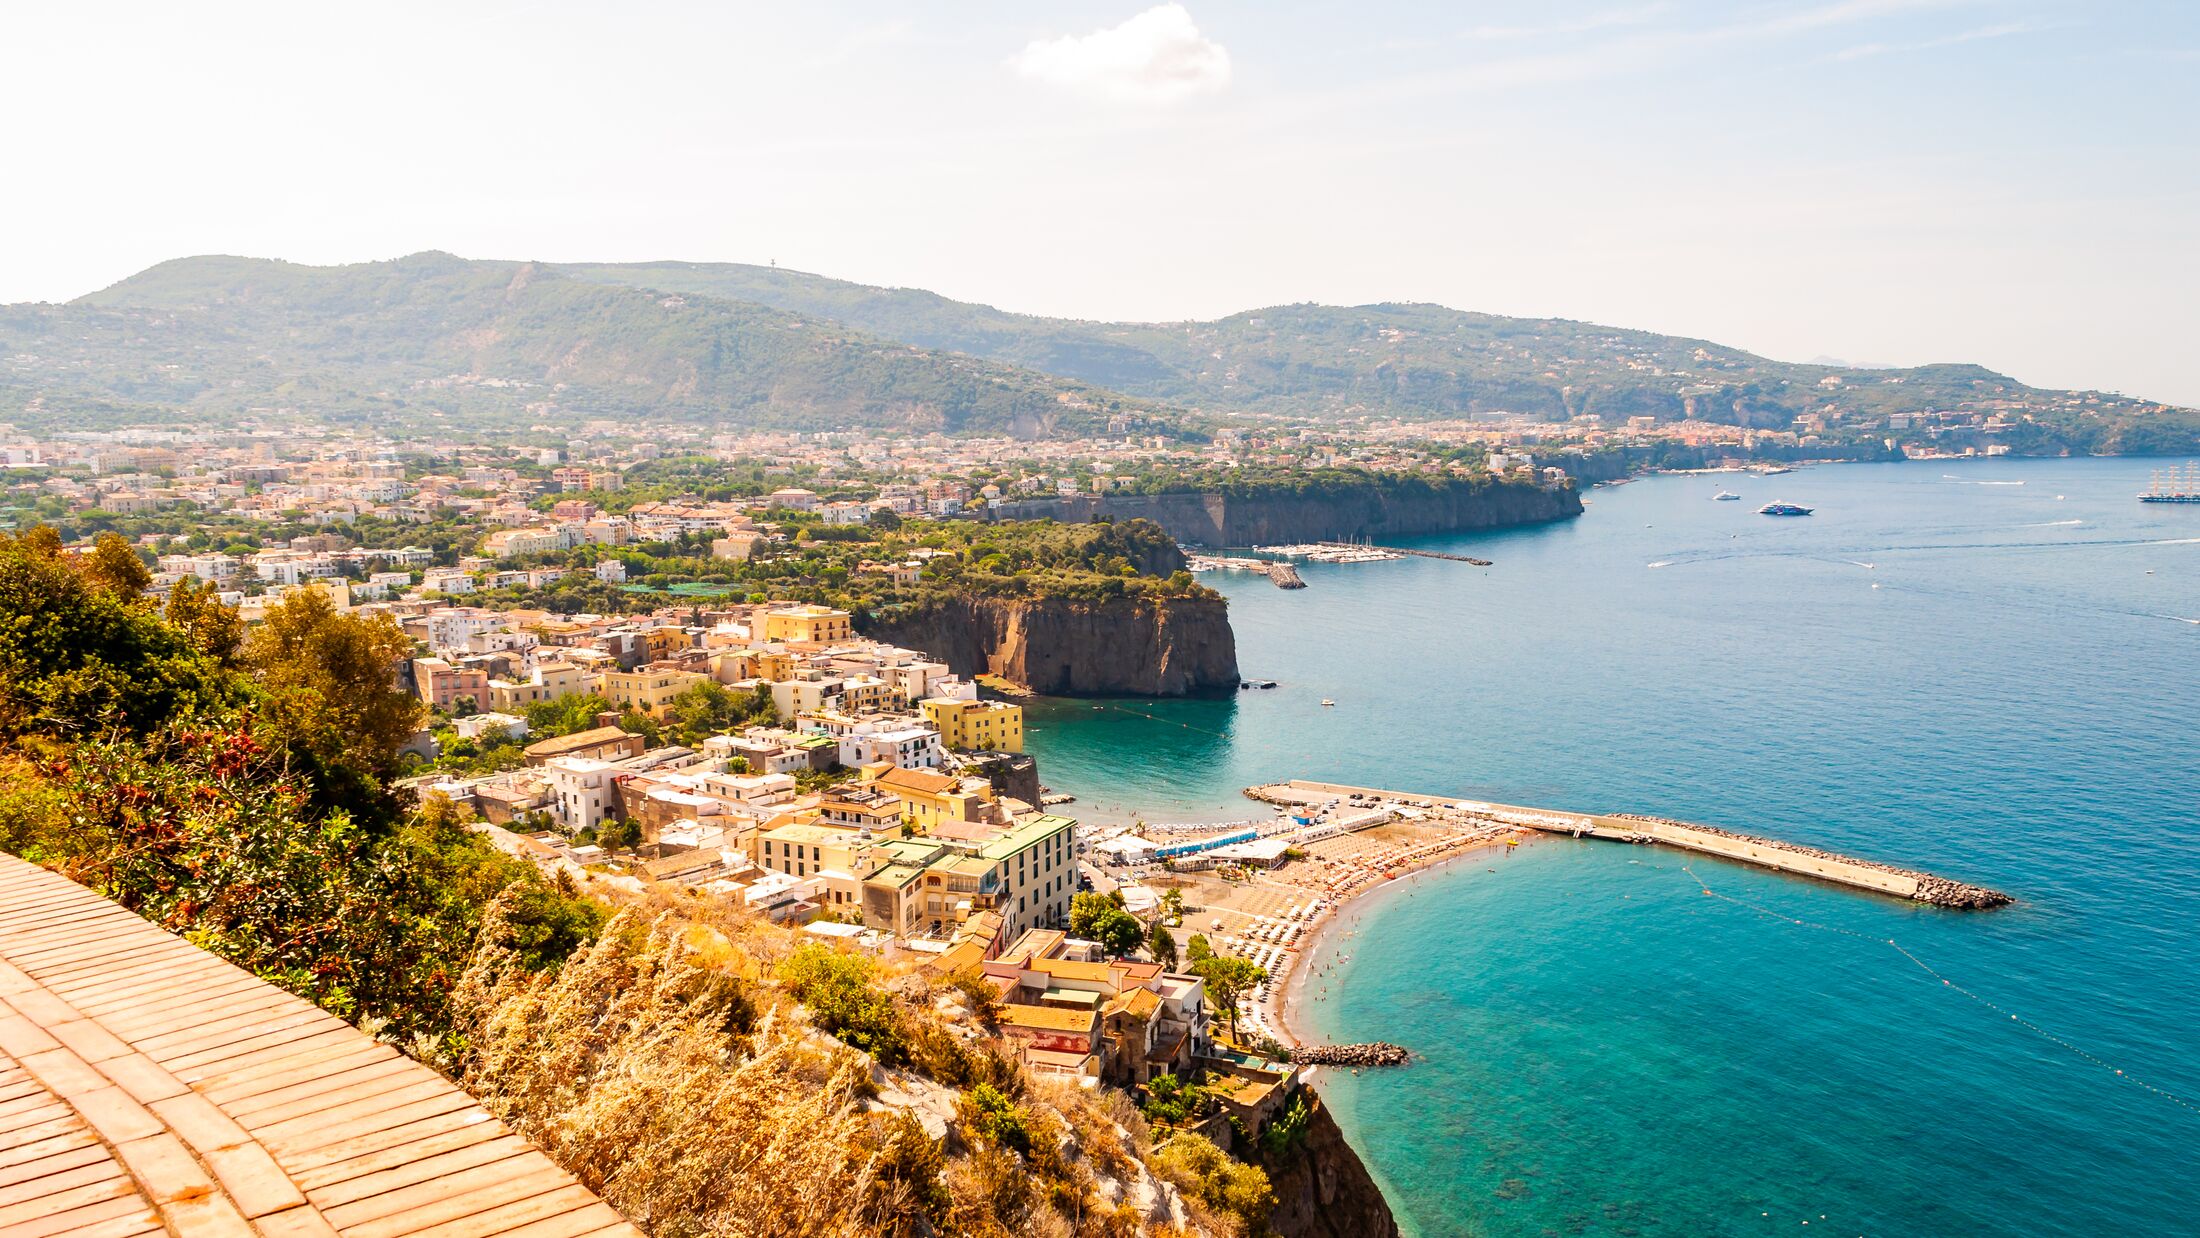 Panorama of high cliffs, Tyrrhenian sea bay with pure azure water, floating boats and ships, pebble beaches, rocky surroundings of Meta, Sant'Agnello and Sorrento cities near Naples region in Italy